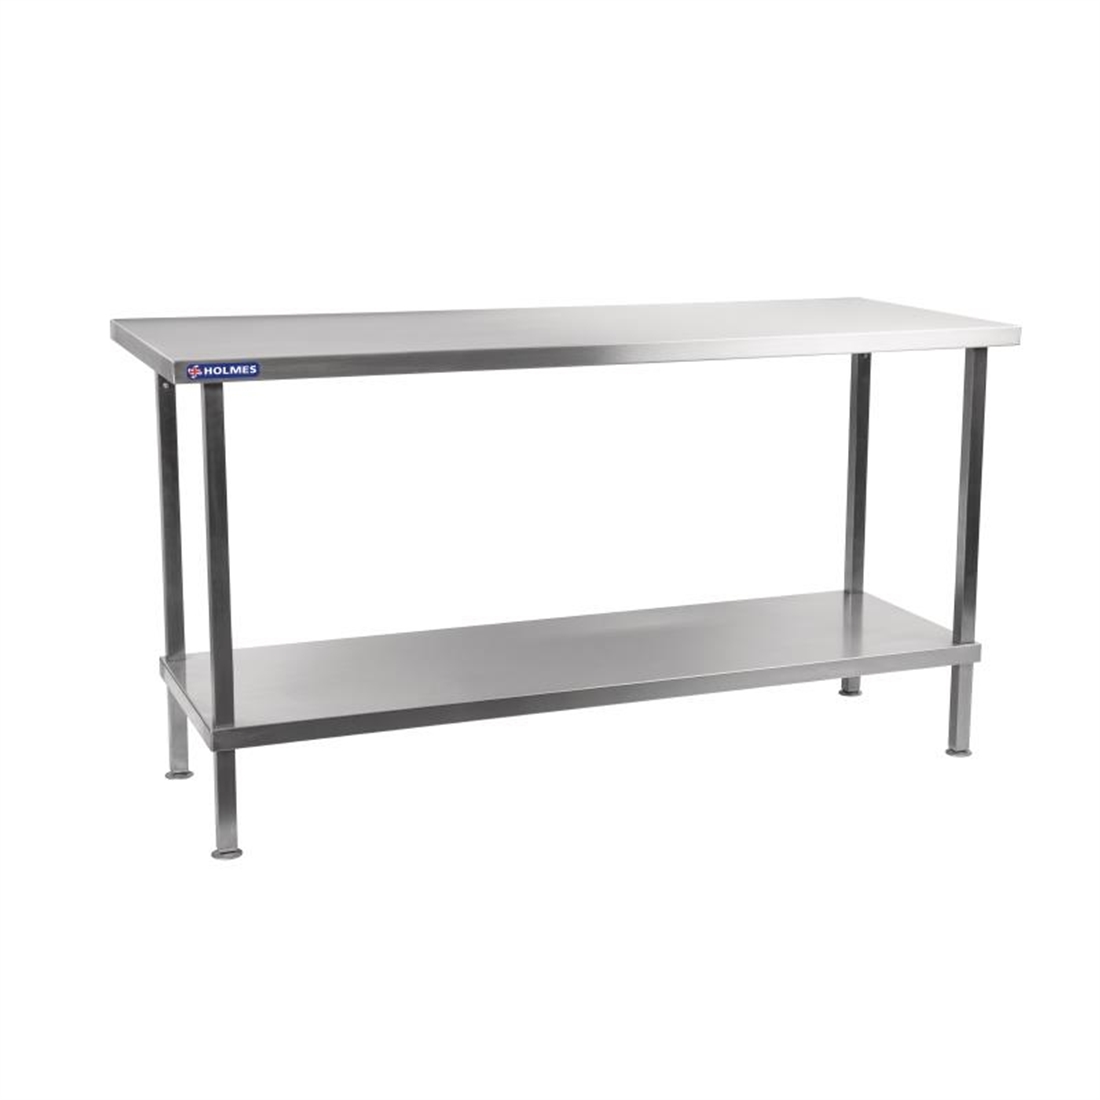 Holmes Self Asssembly Stainless Steel Centre Table 2100mm